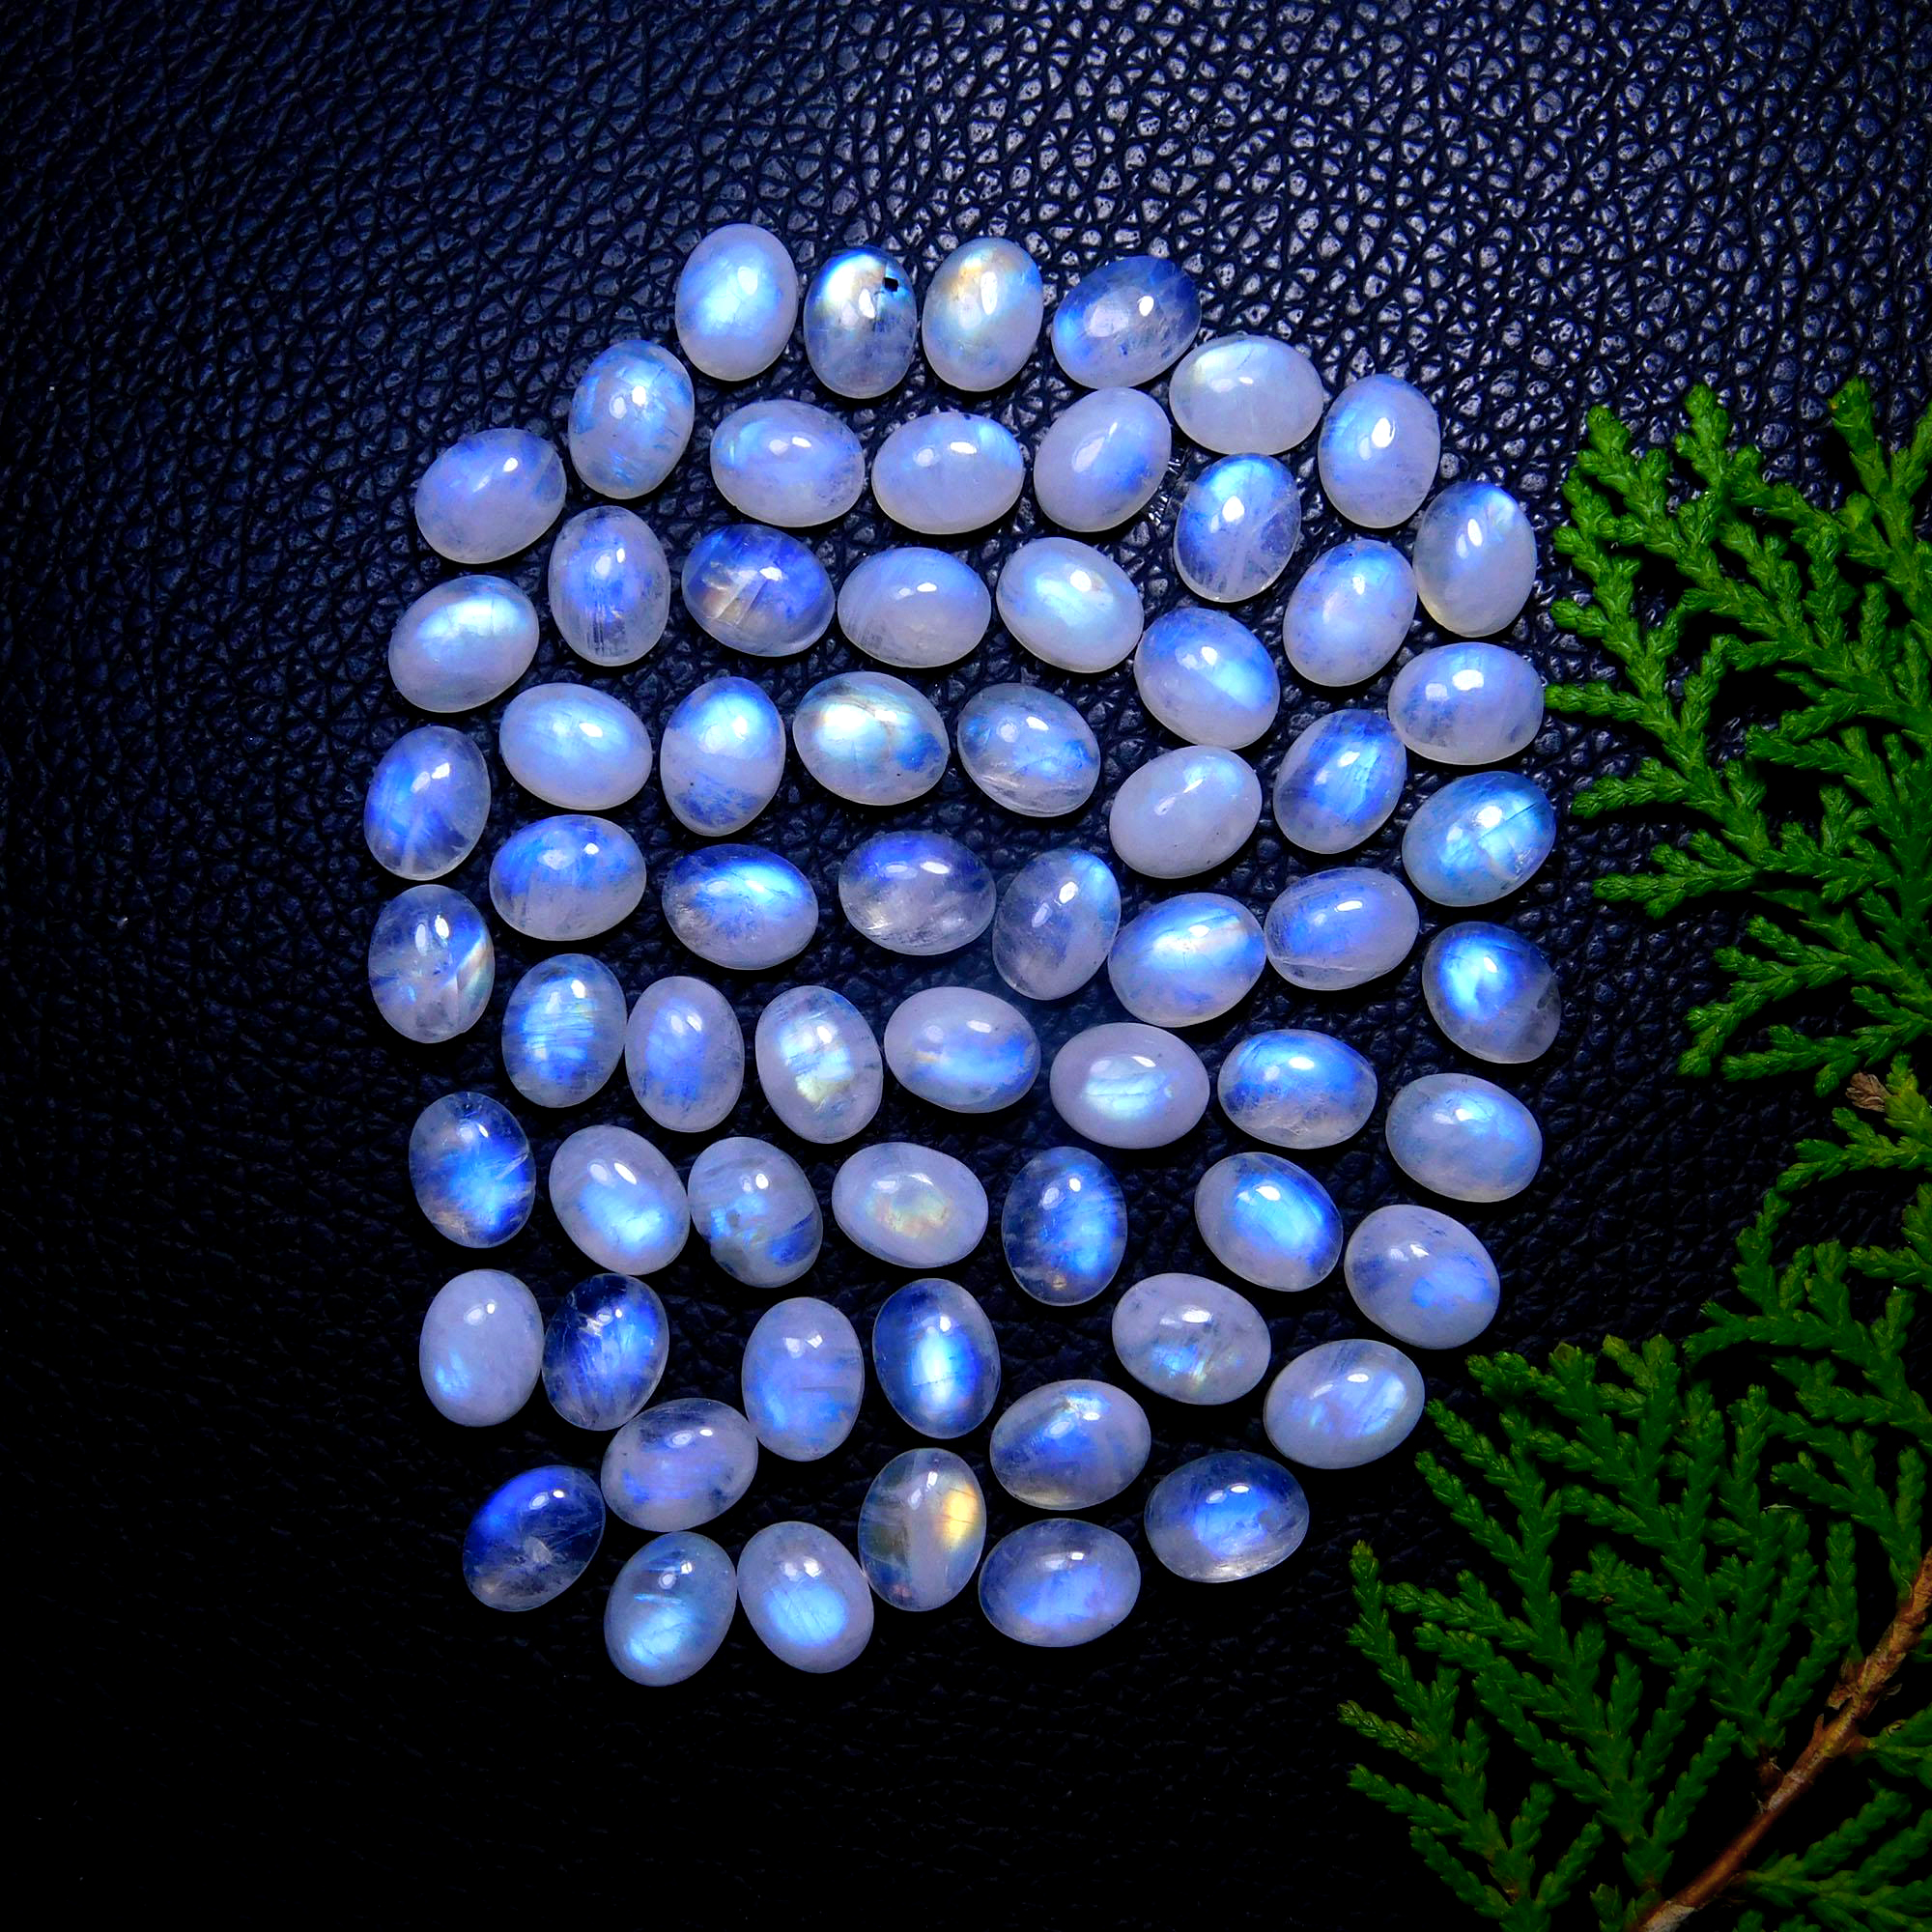 65Pcs 136Cts Natural Rainbow Moonstone Oval Shape Blue Fire Cabochon Lot Loose Gemstone Jewelry Crystal For Birthday Gift 9X7mm #9835